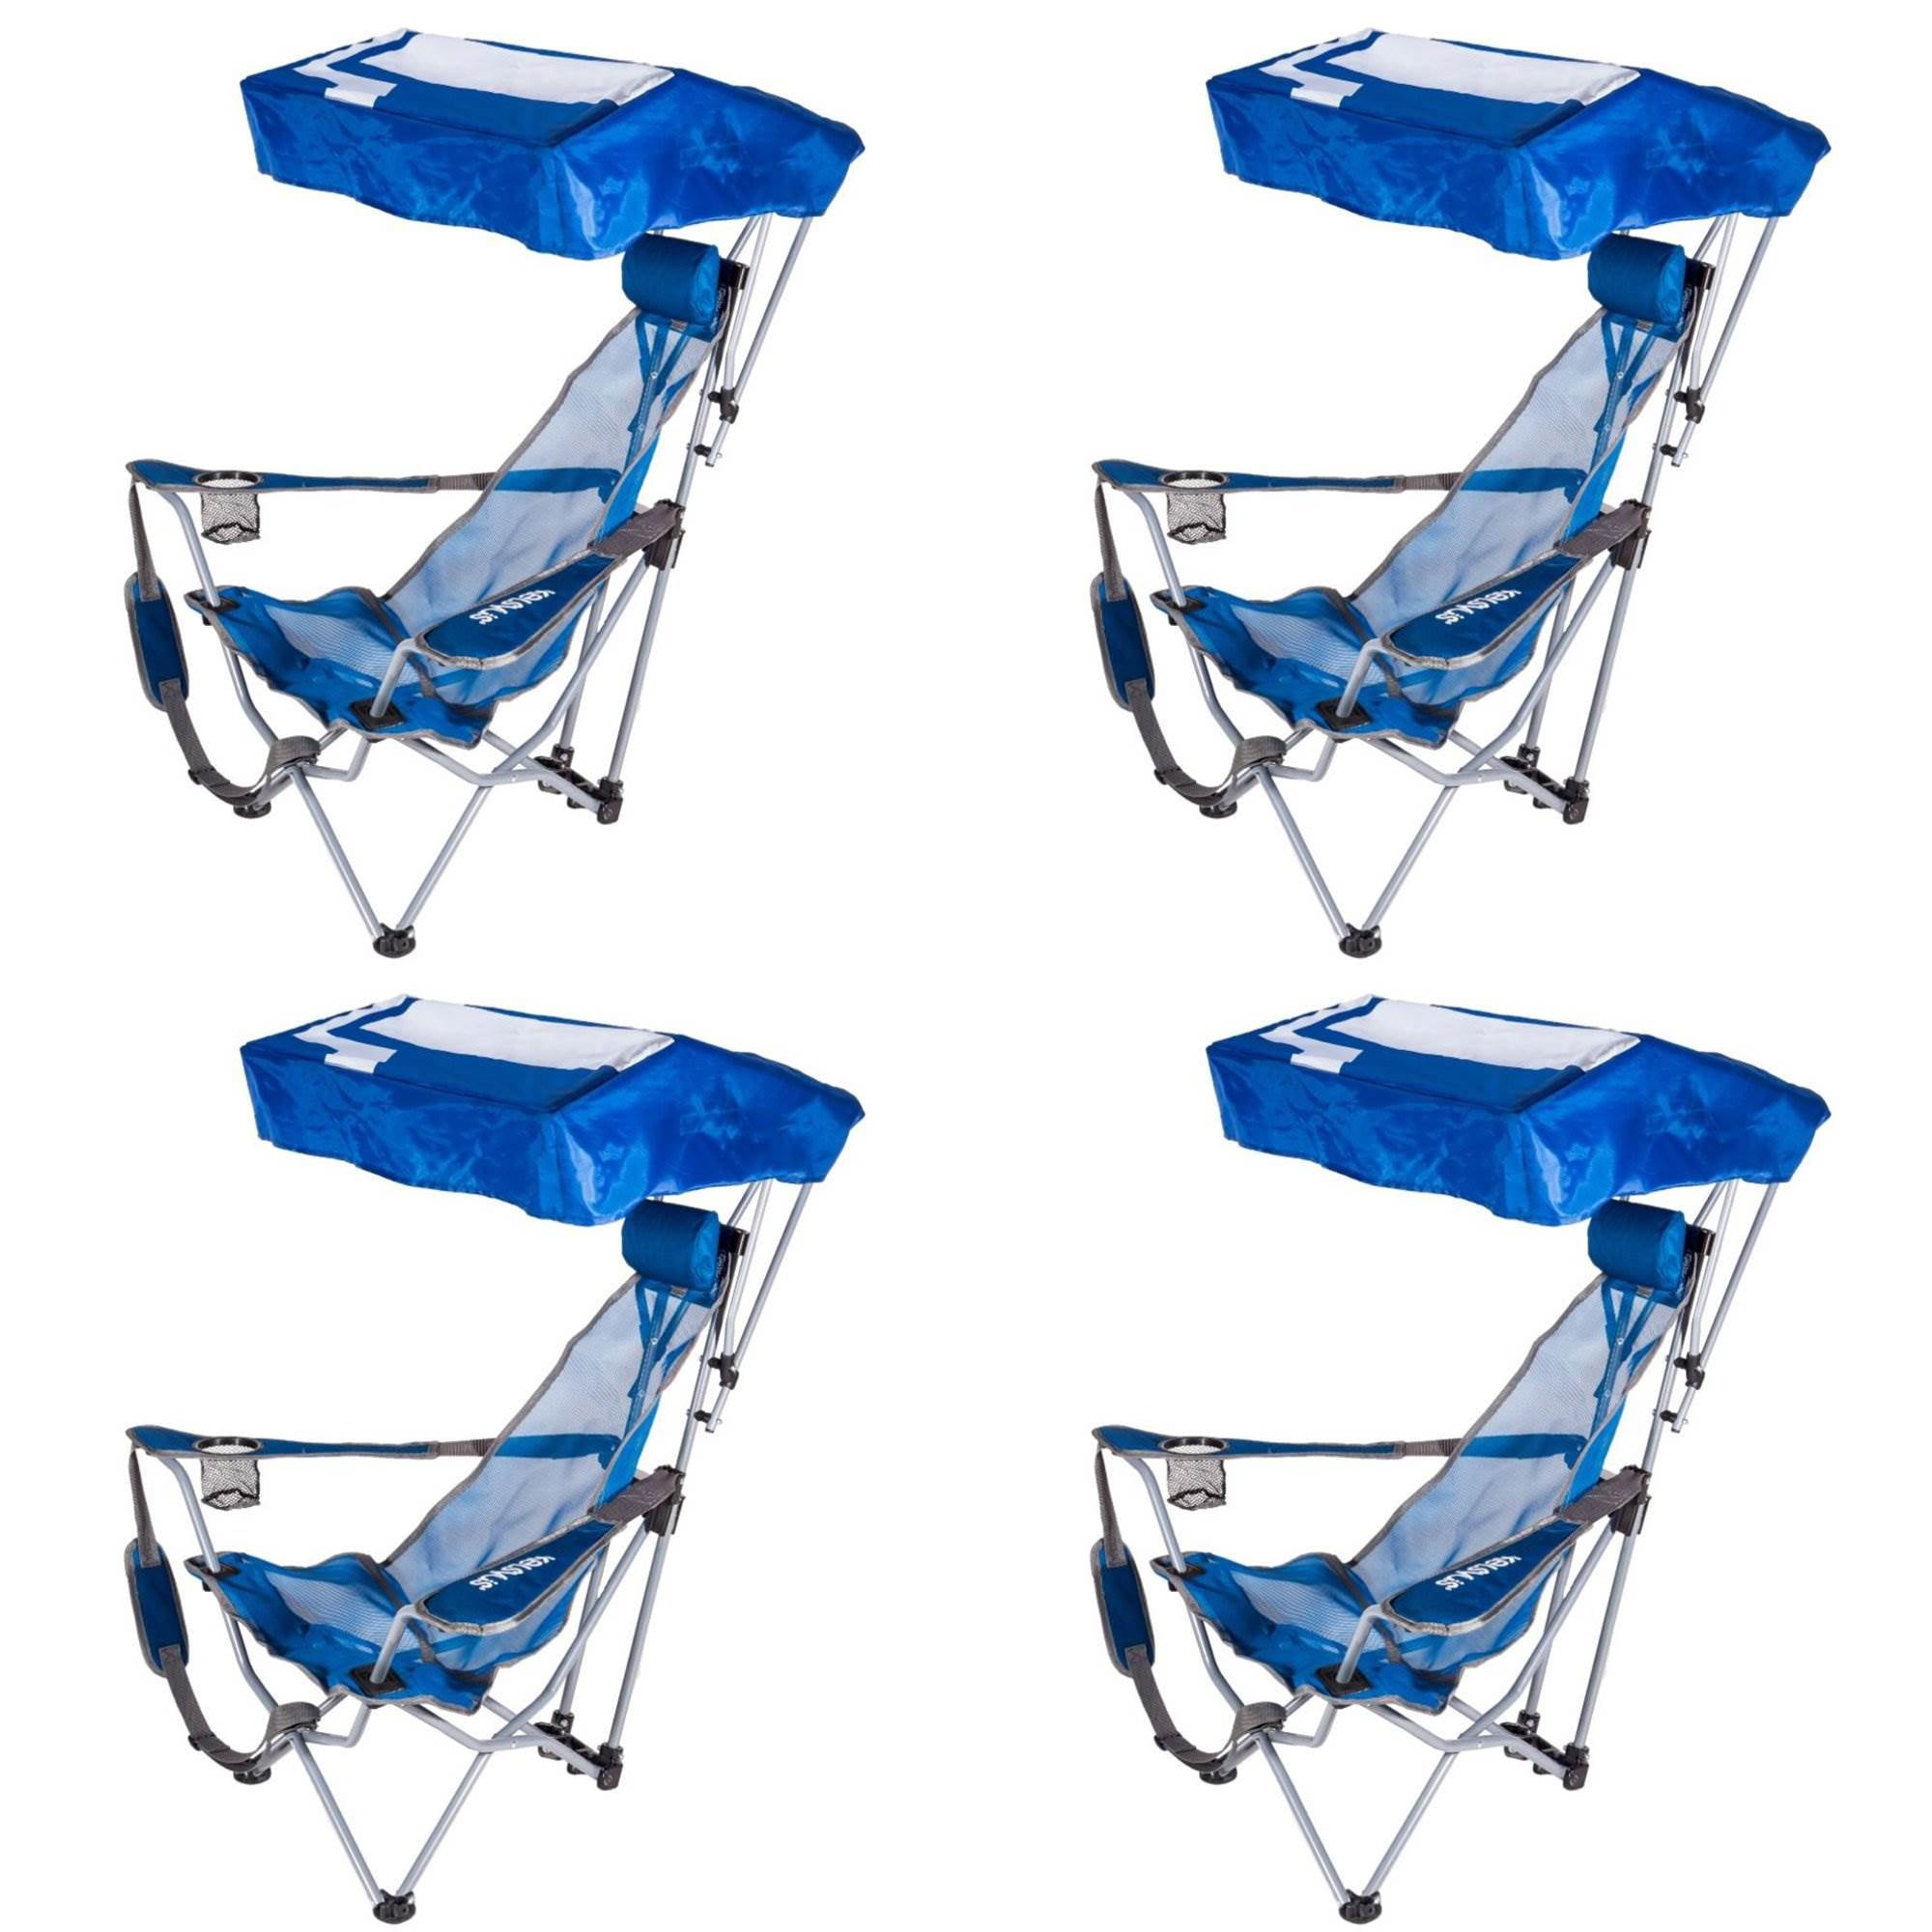 New Backpack Beach Chair With Canopy for Large Space